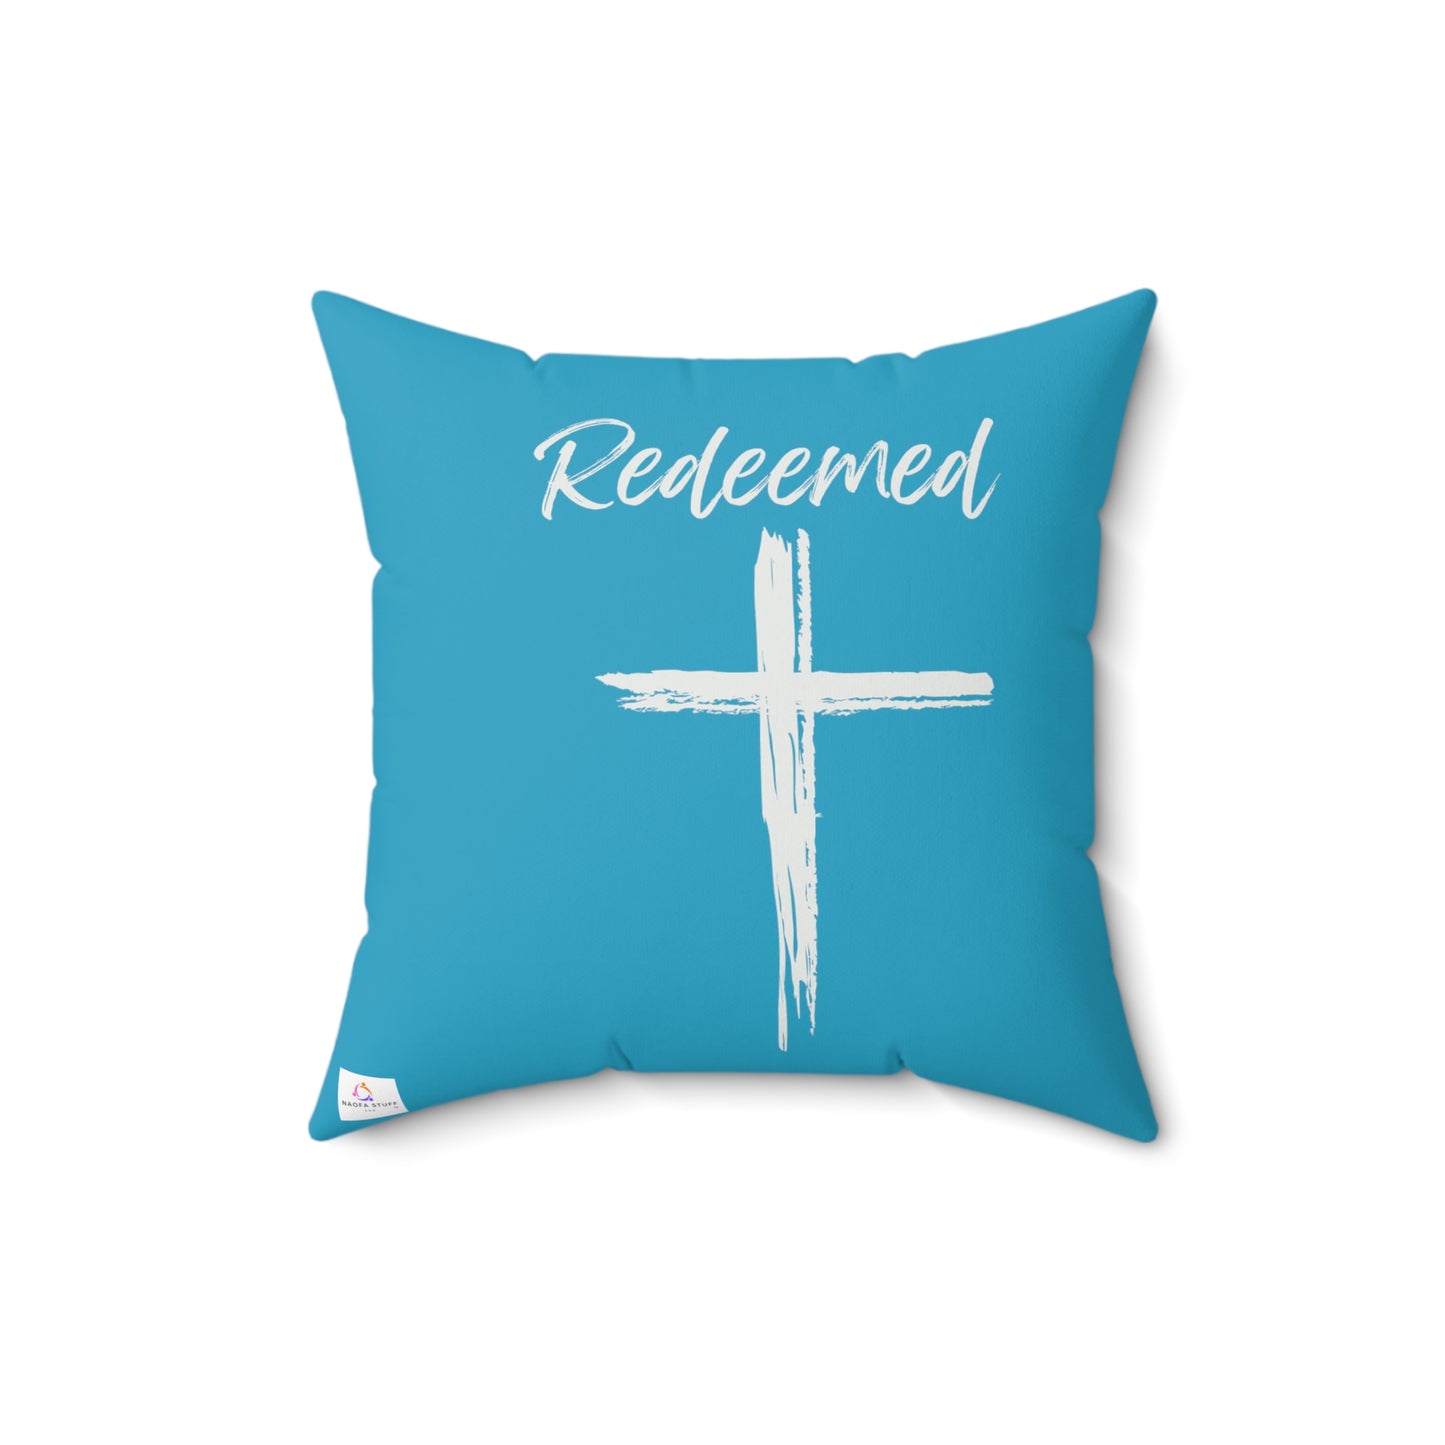 Redeemed Faux Suede Square Pillow 16 x 16